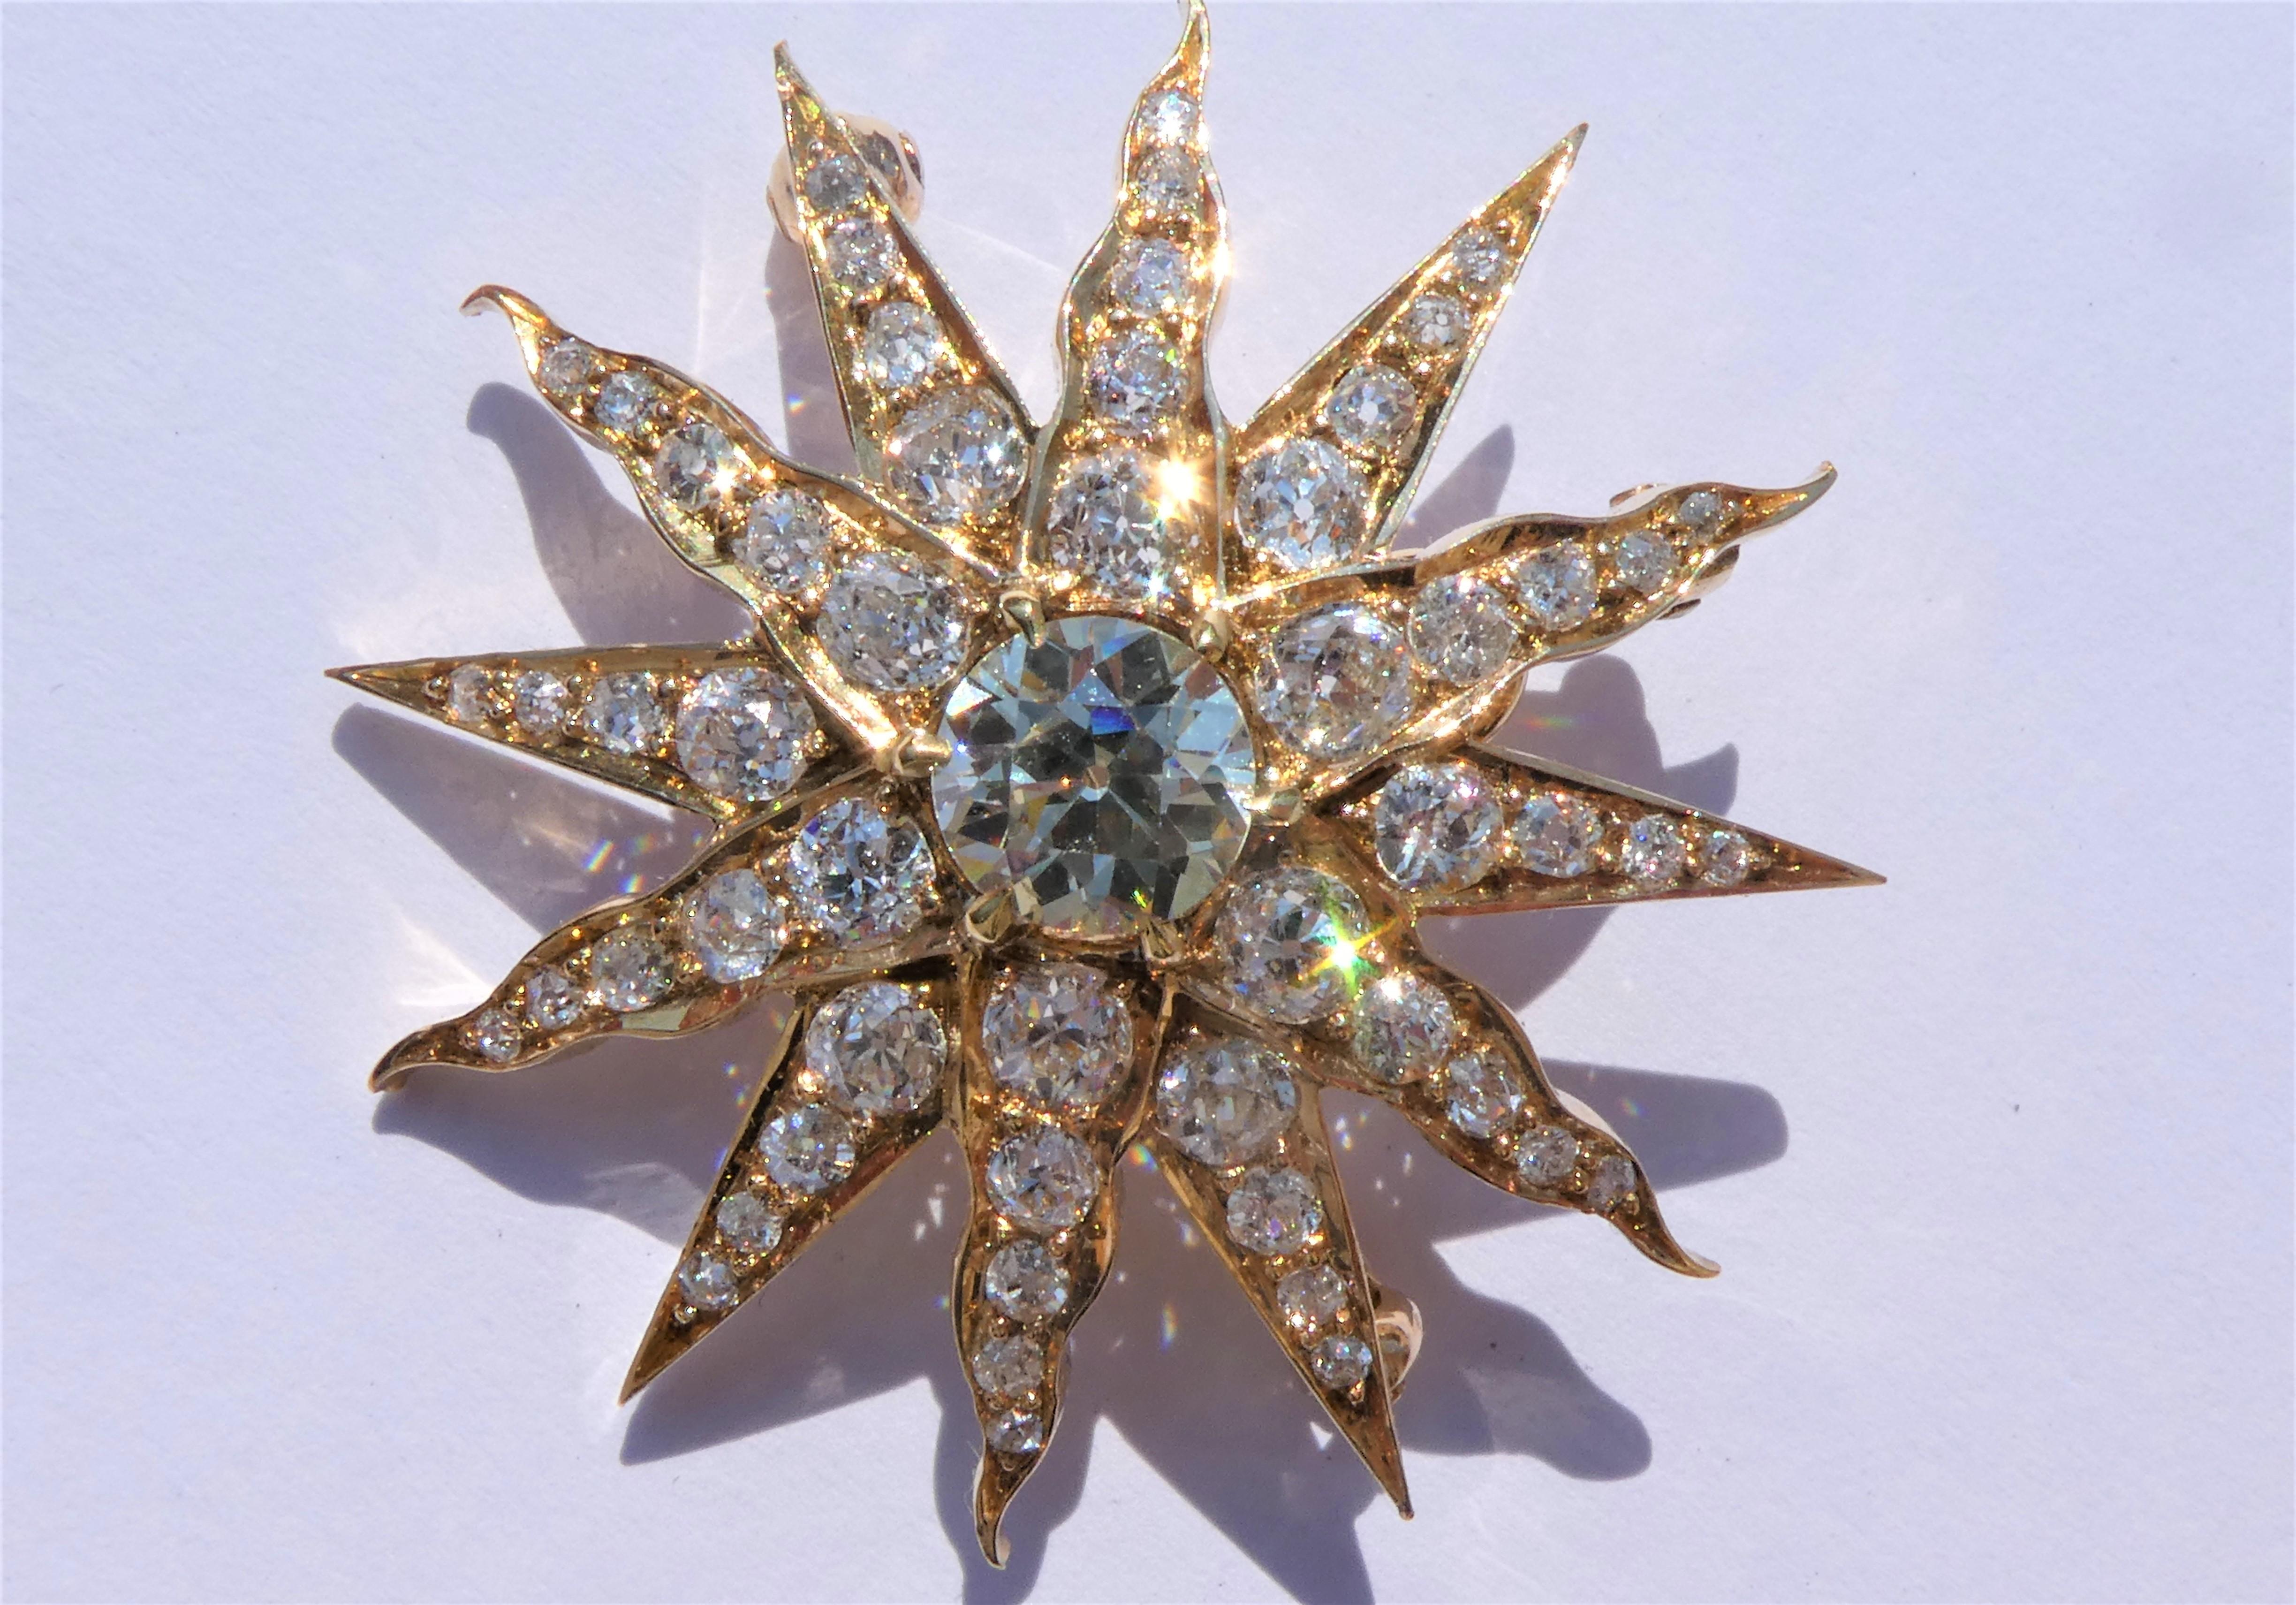 The Victorian star or sunburst brooch has a fold down attachement. Therefore it can be worn as a pendant or brooch. The pin centers an old mine cut diamond weighing circa 1.3 carat. Accentuating the center stone there a old cut diamonds of circa 2.3